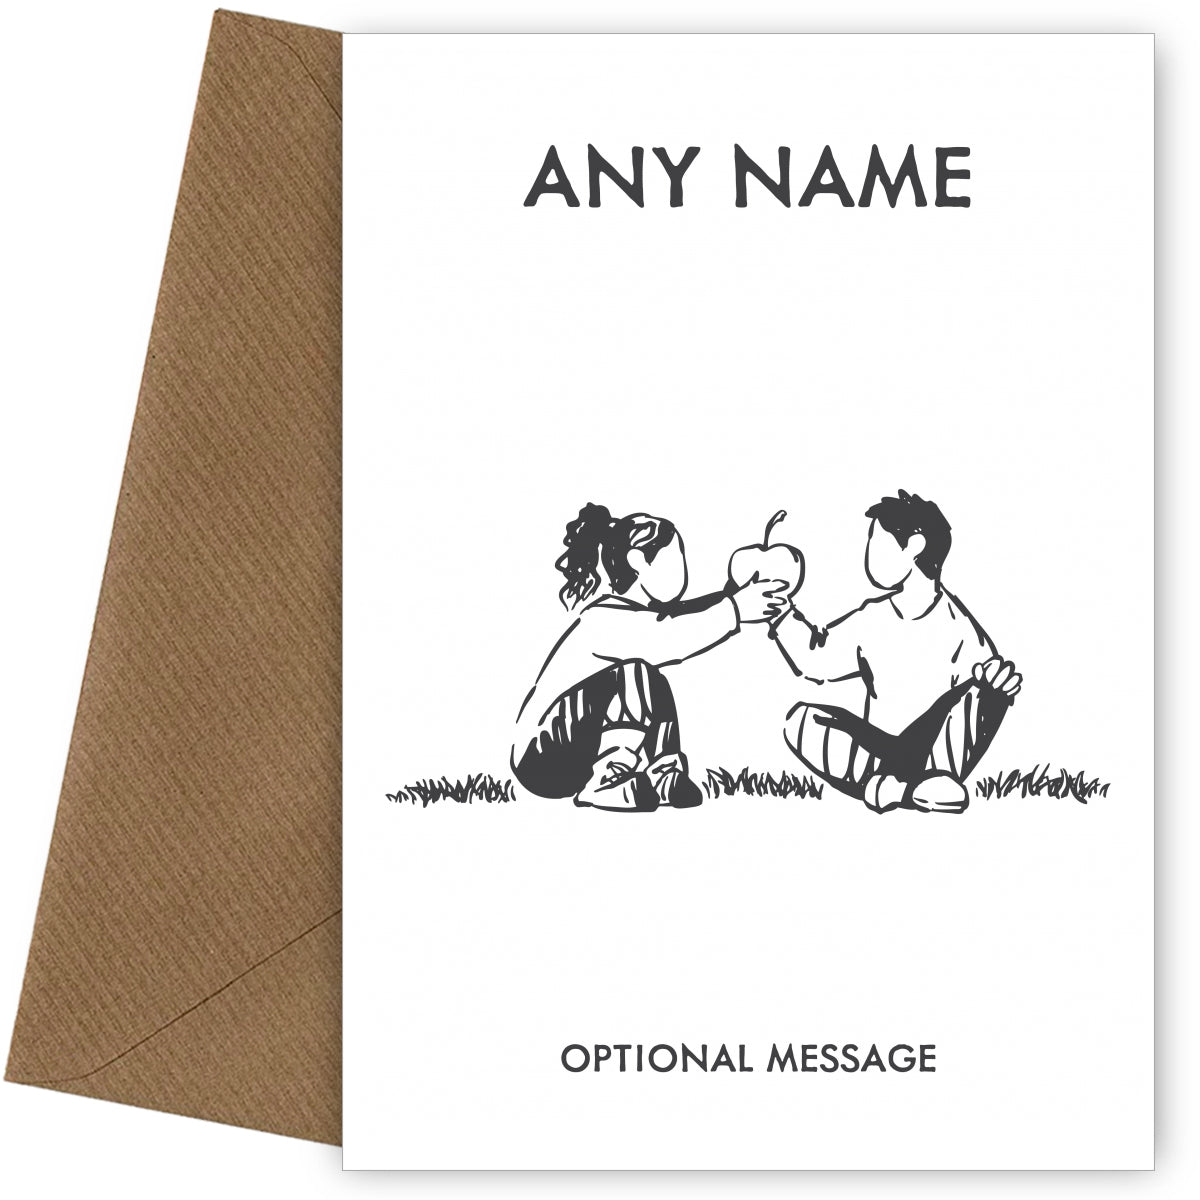 Personalised Card for Teachers of First Day at School (Kids with Apple)